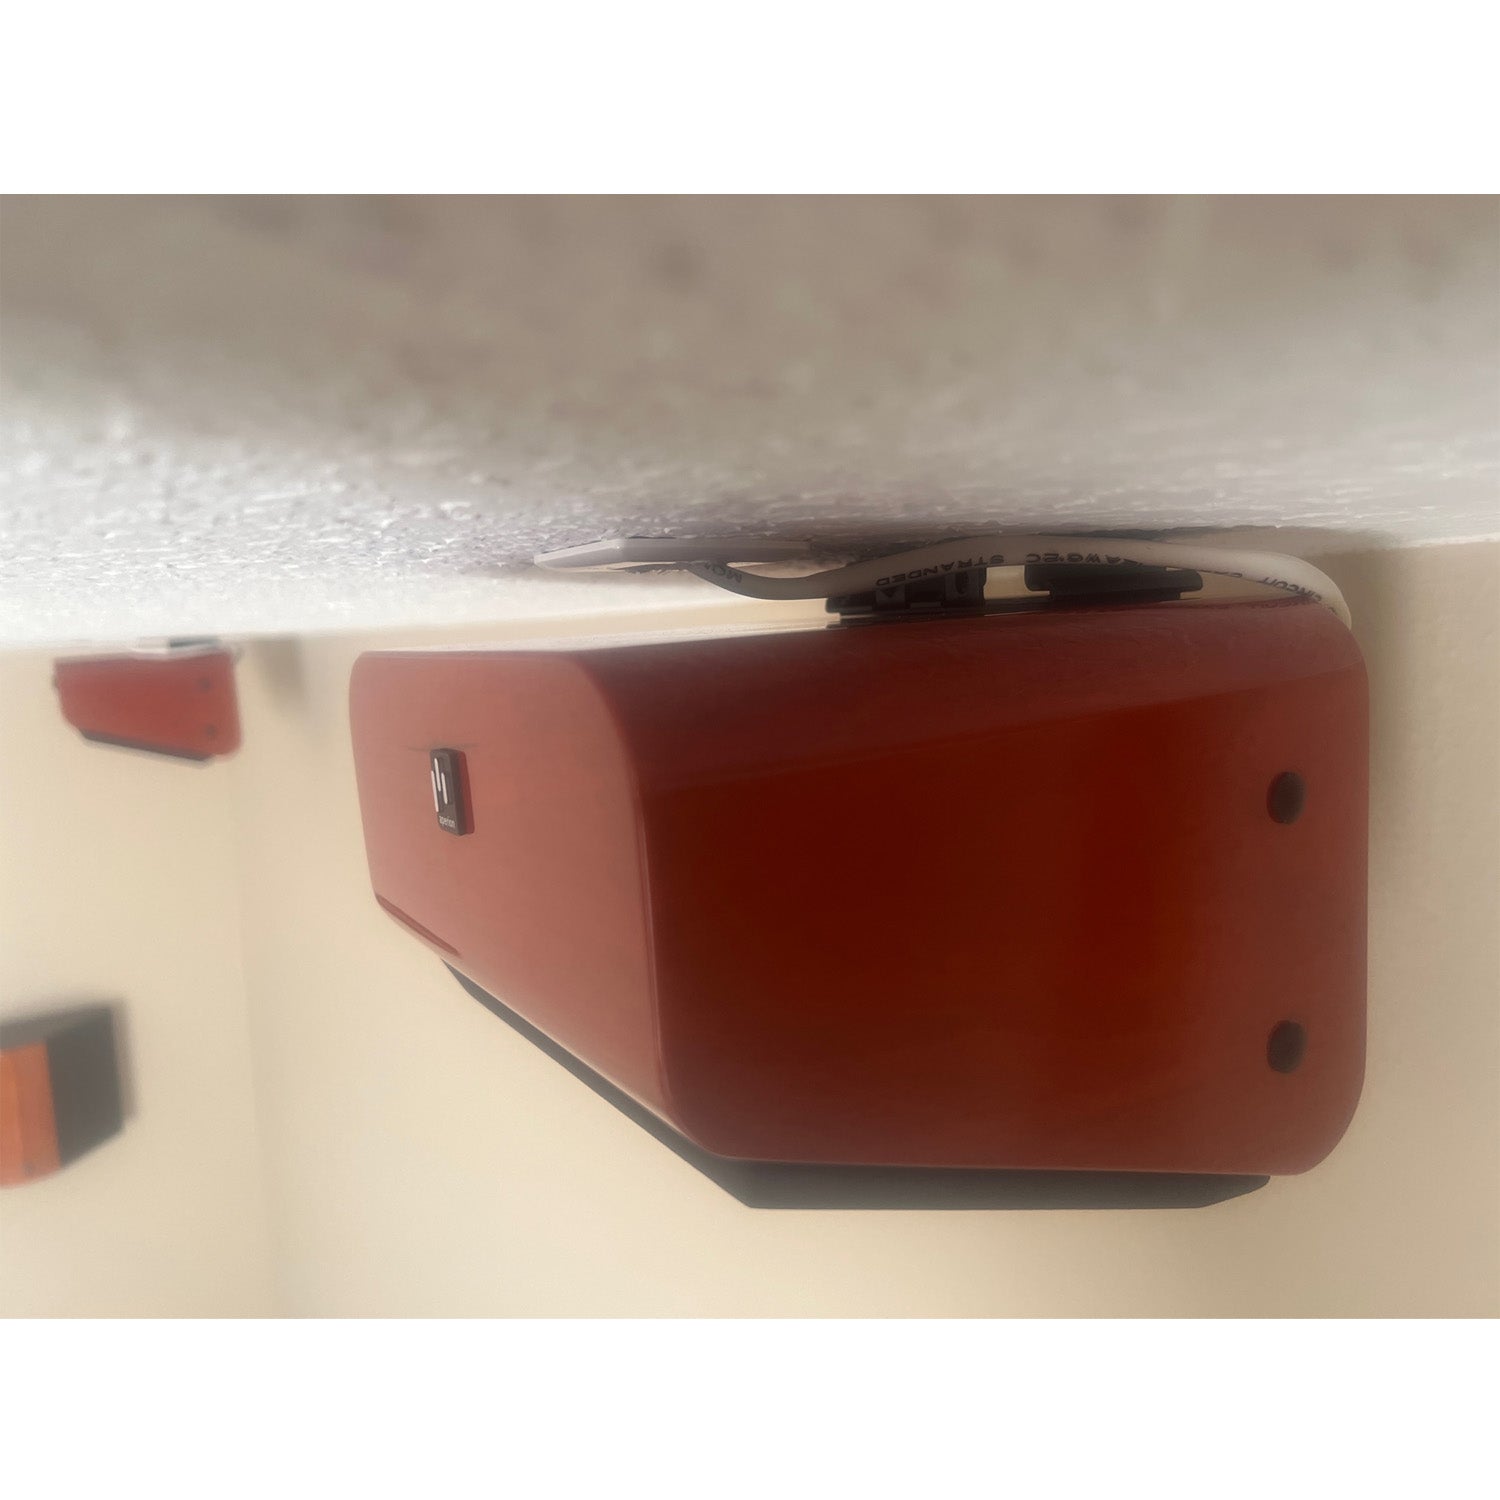 Aperion-A5-Atmos-5.25"-Immersive-Reflective/Height-Module-Speaker-GlossCherry-Mount-On-Ceiling-aperionaudio